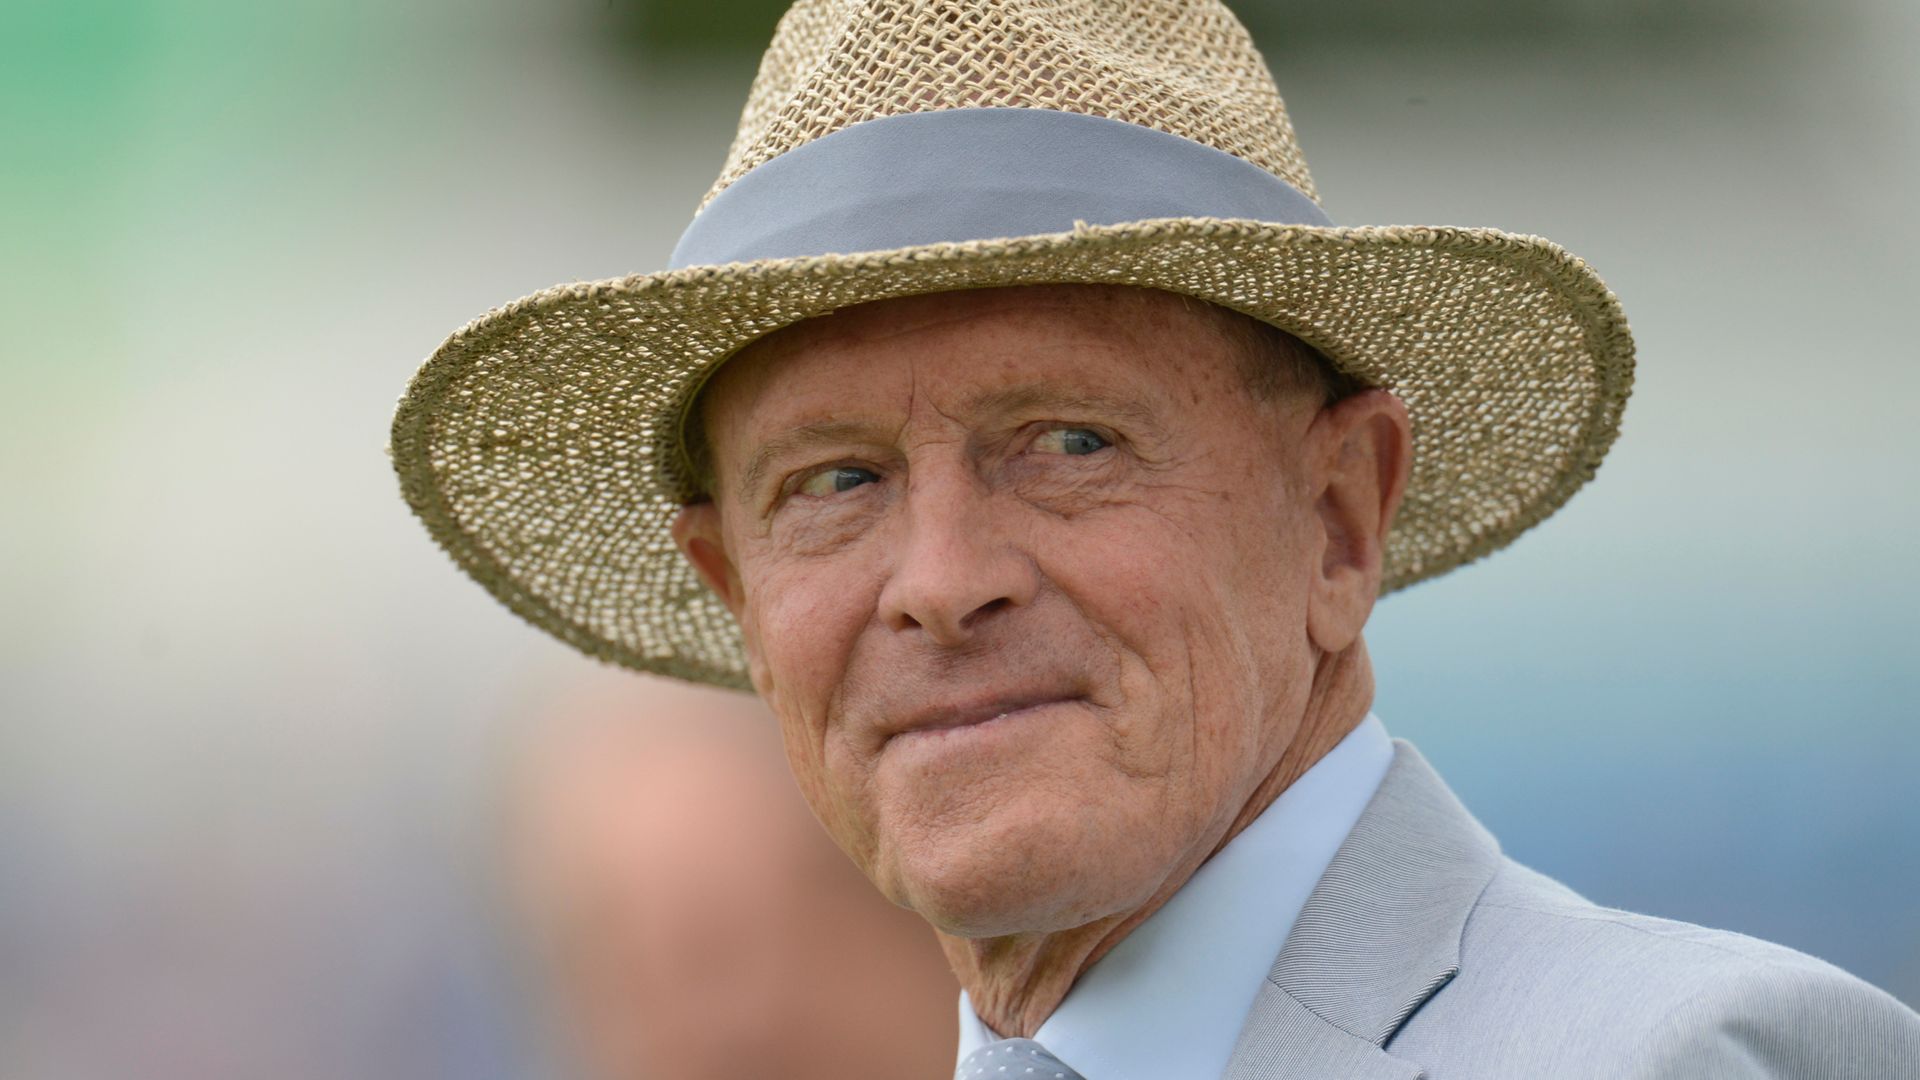 Sir Geoffrey Boycott 'unable to eat or drink' after developing pneumonia